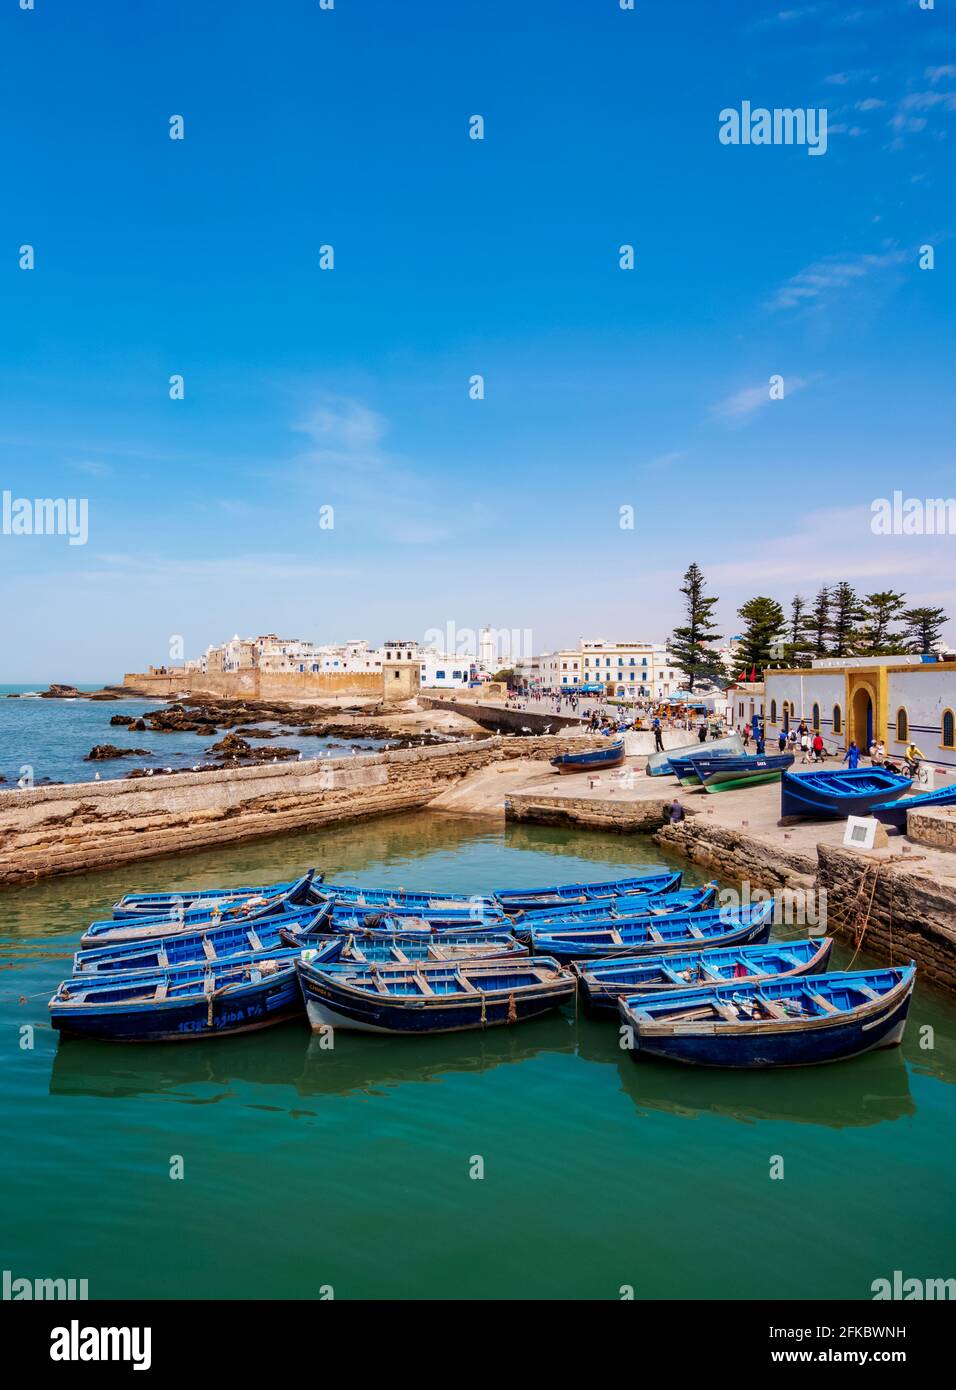 Cityscape with blue boats in the Scala Harbour and the Medina city walls, Essaouira, Marrakesh-Safi Region, Morocco, North Africa, Africa Stock Photo